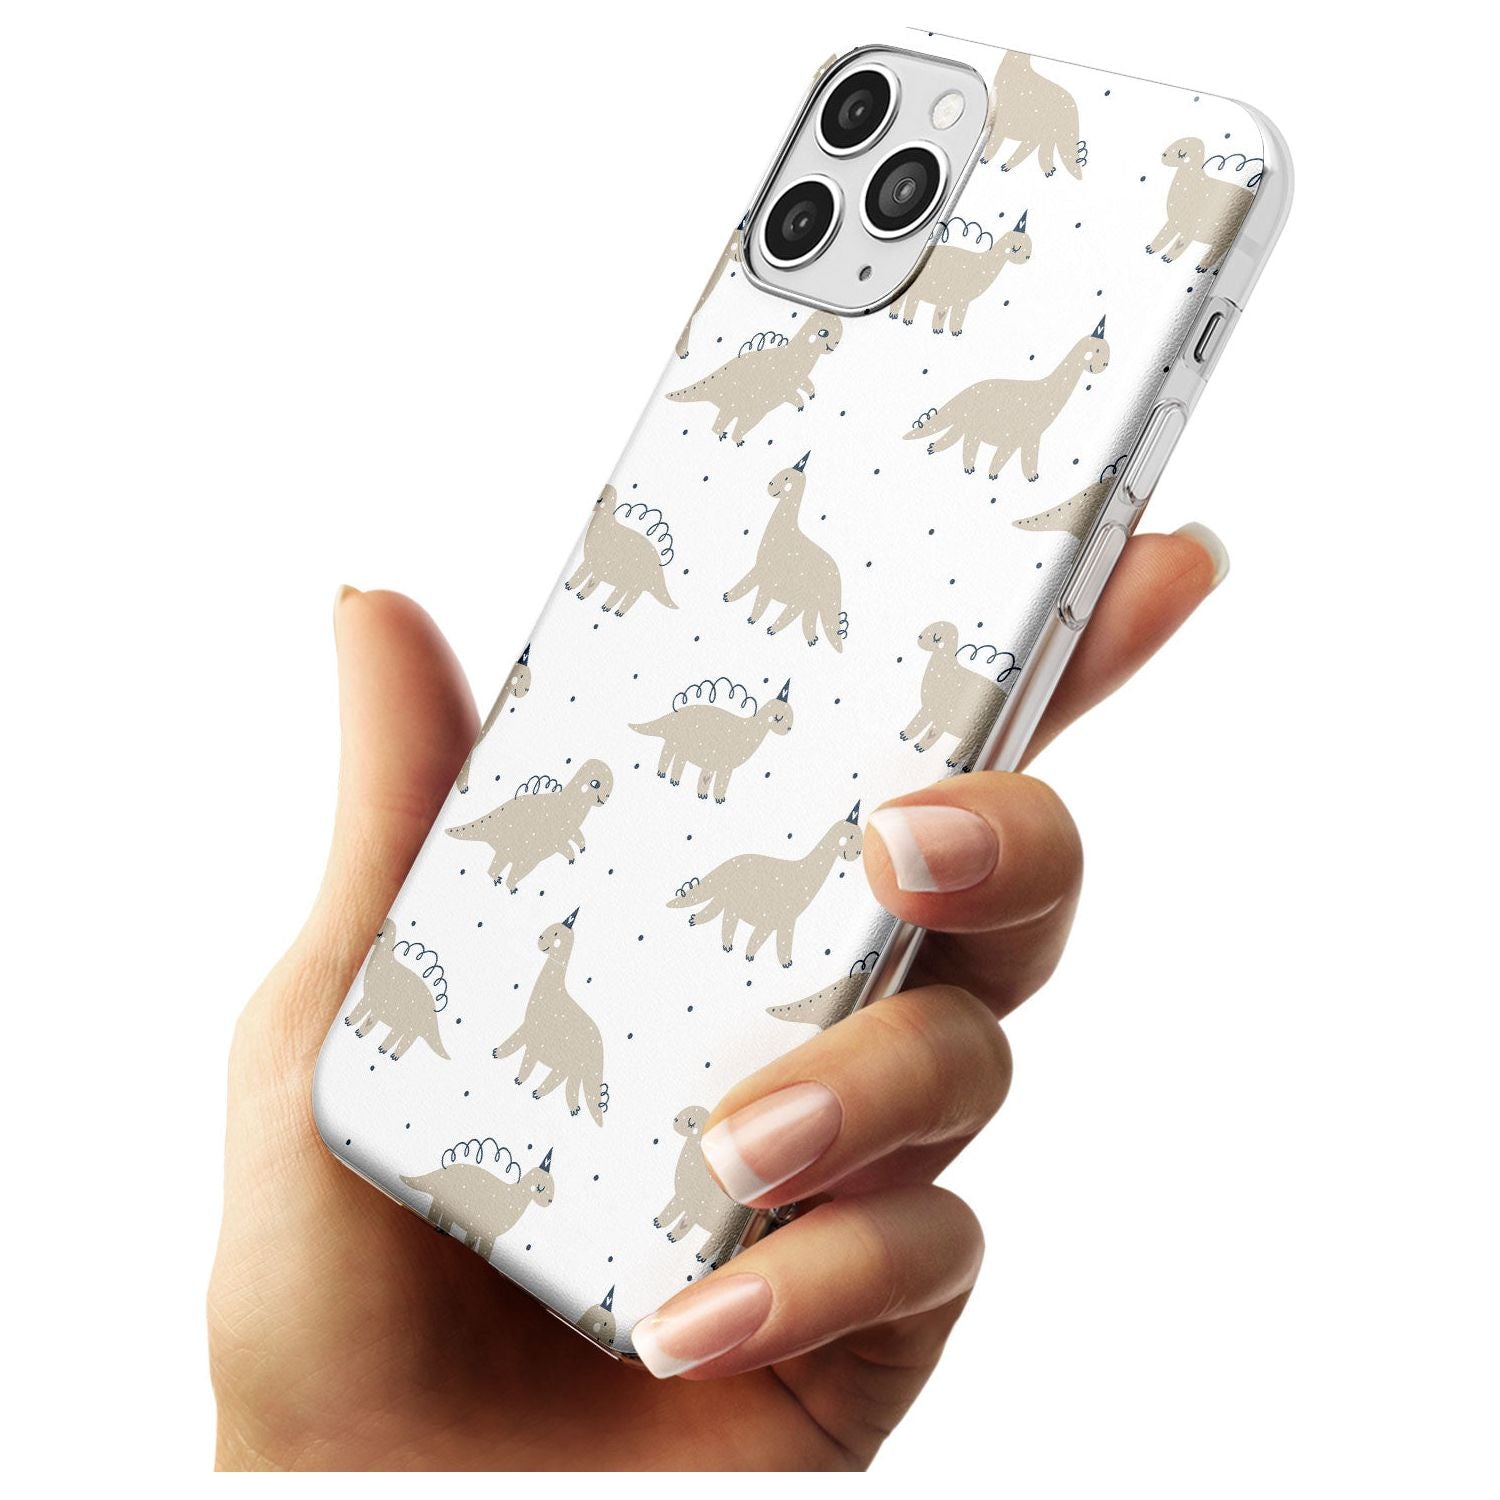 Adorable Dinosaurs Pattern Slim TPU Phone Case for iPhone 11 Pro Max